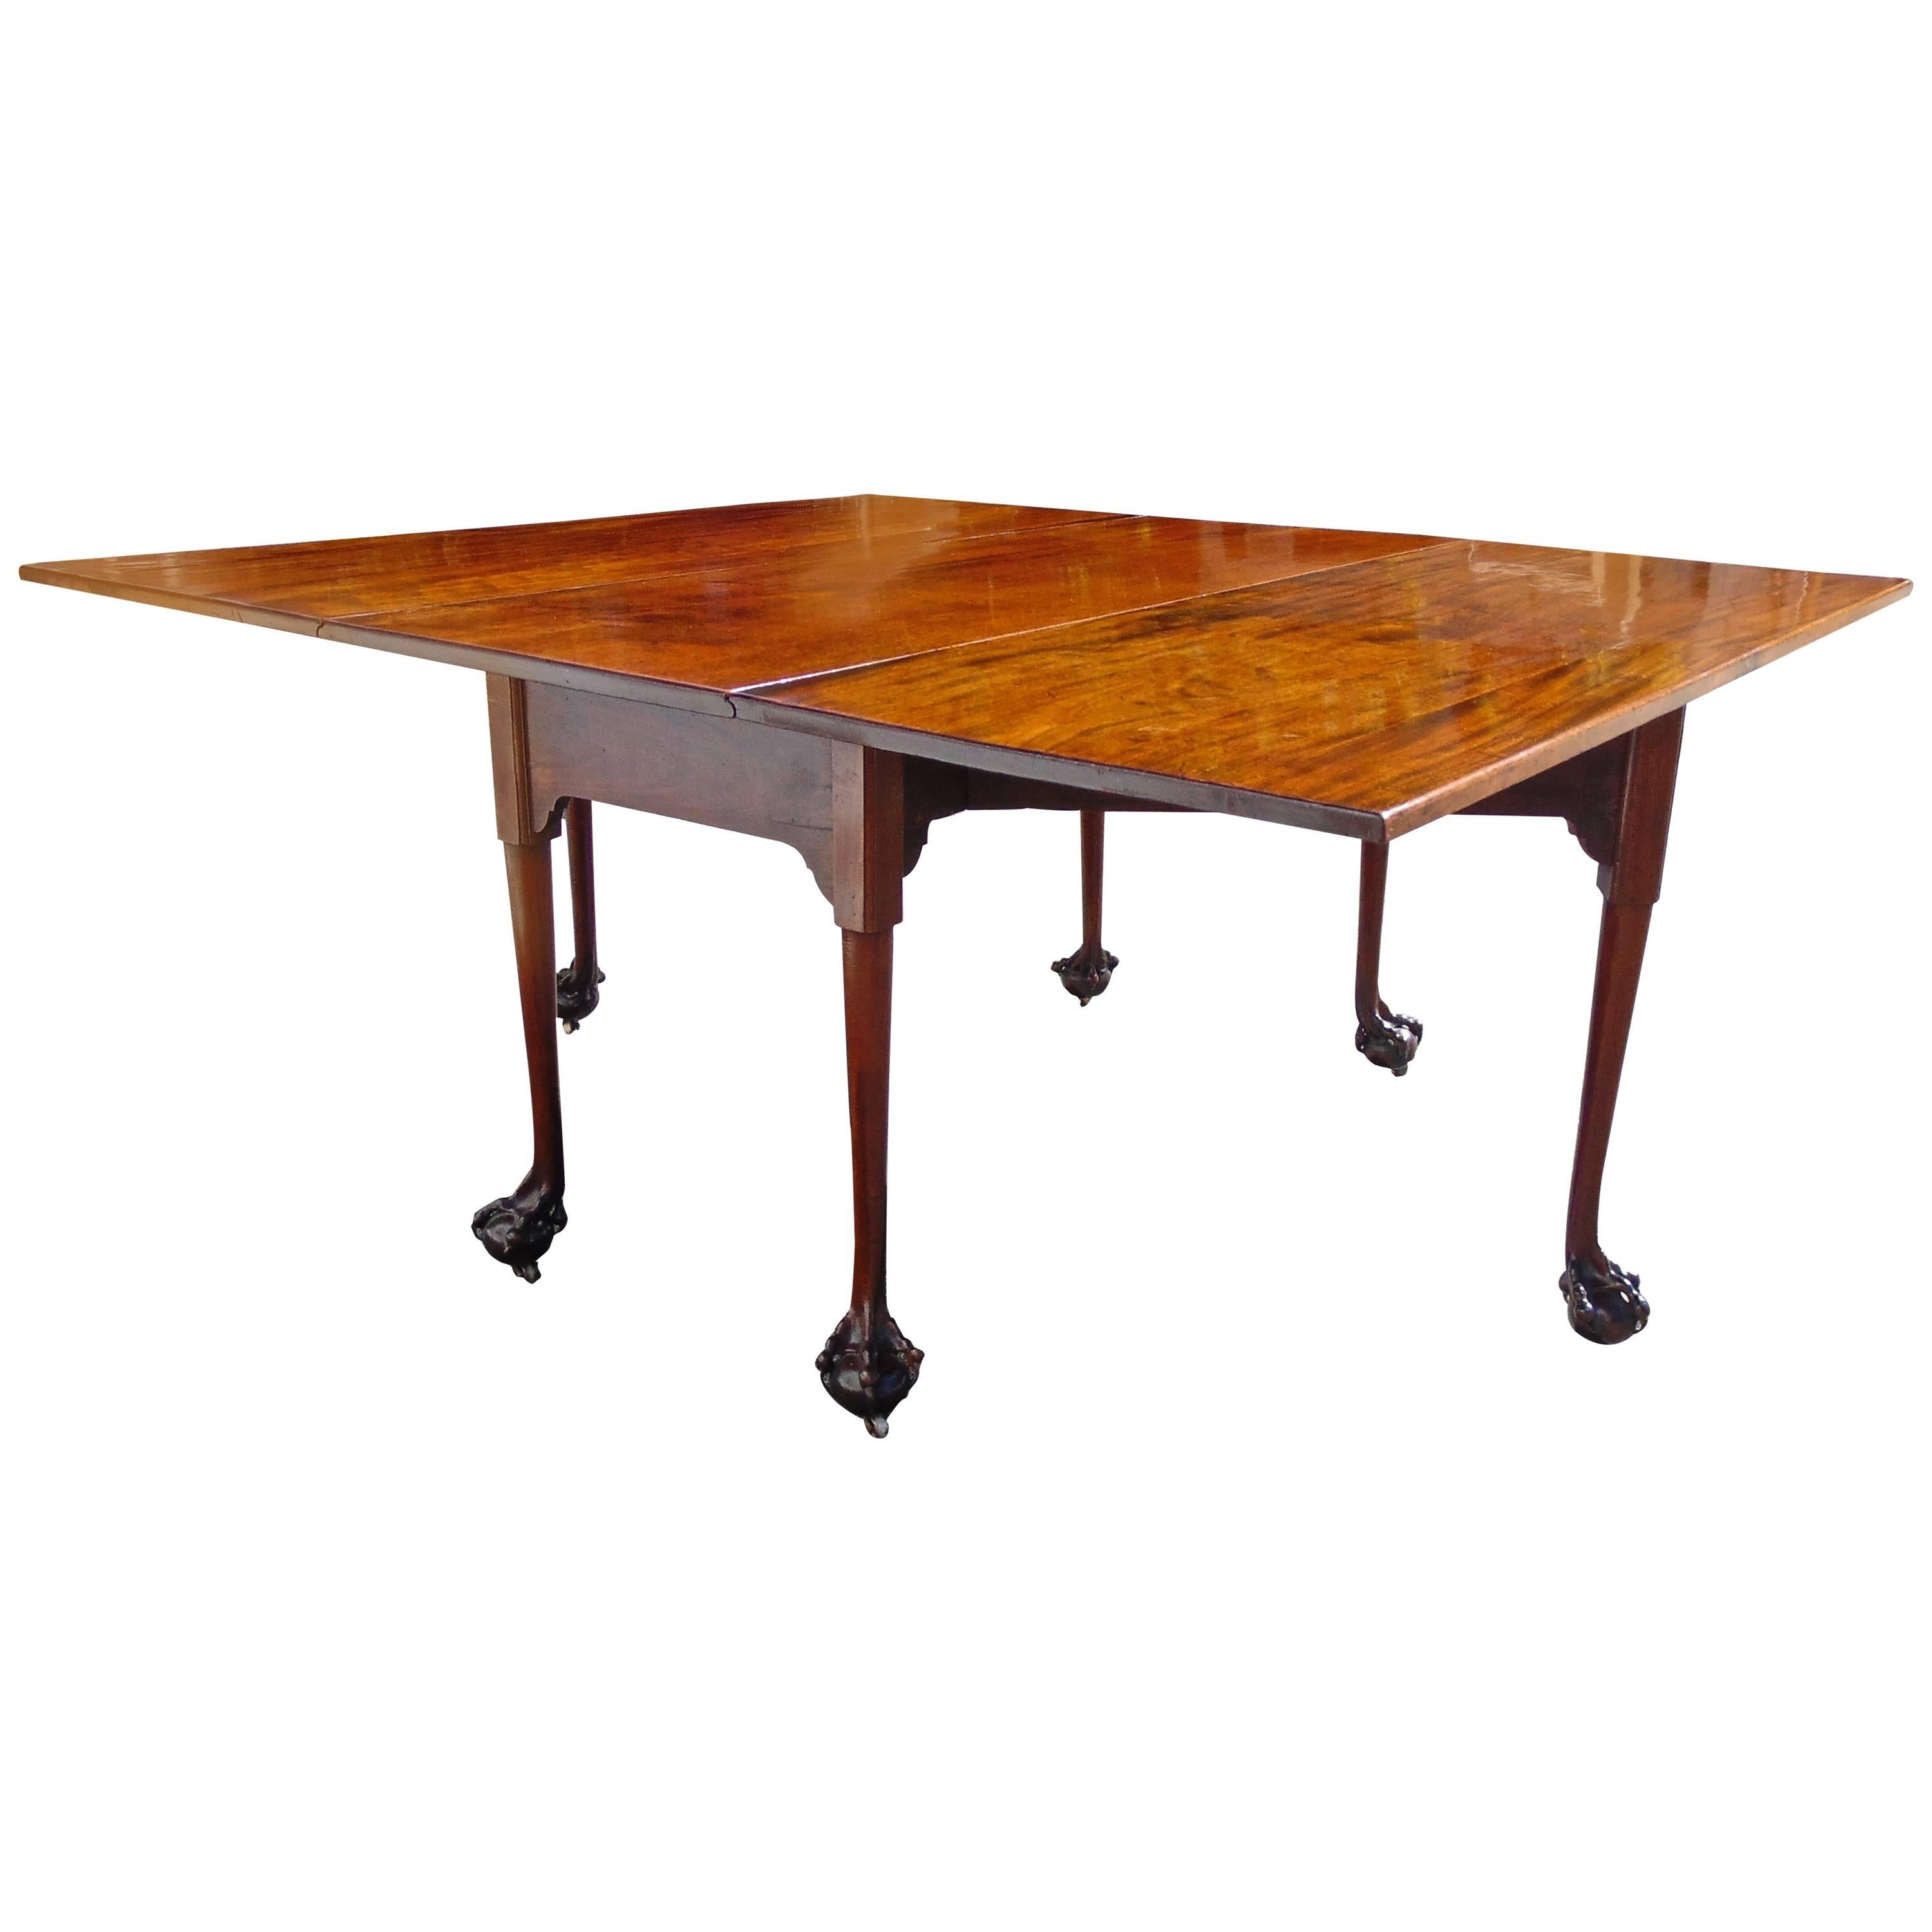 English Chippendale Reticulated Ball and Claw Foot Drop-Leaf Table